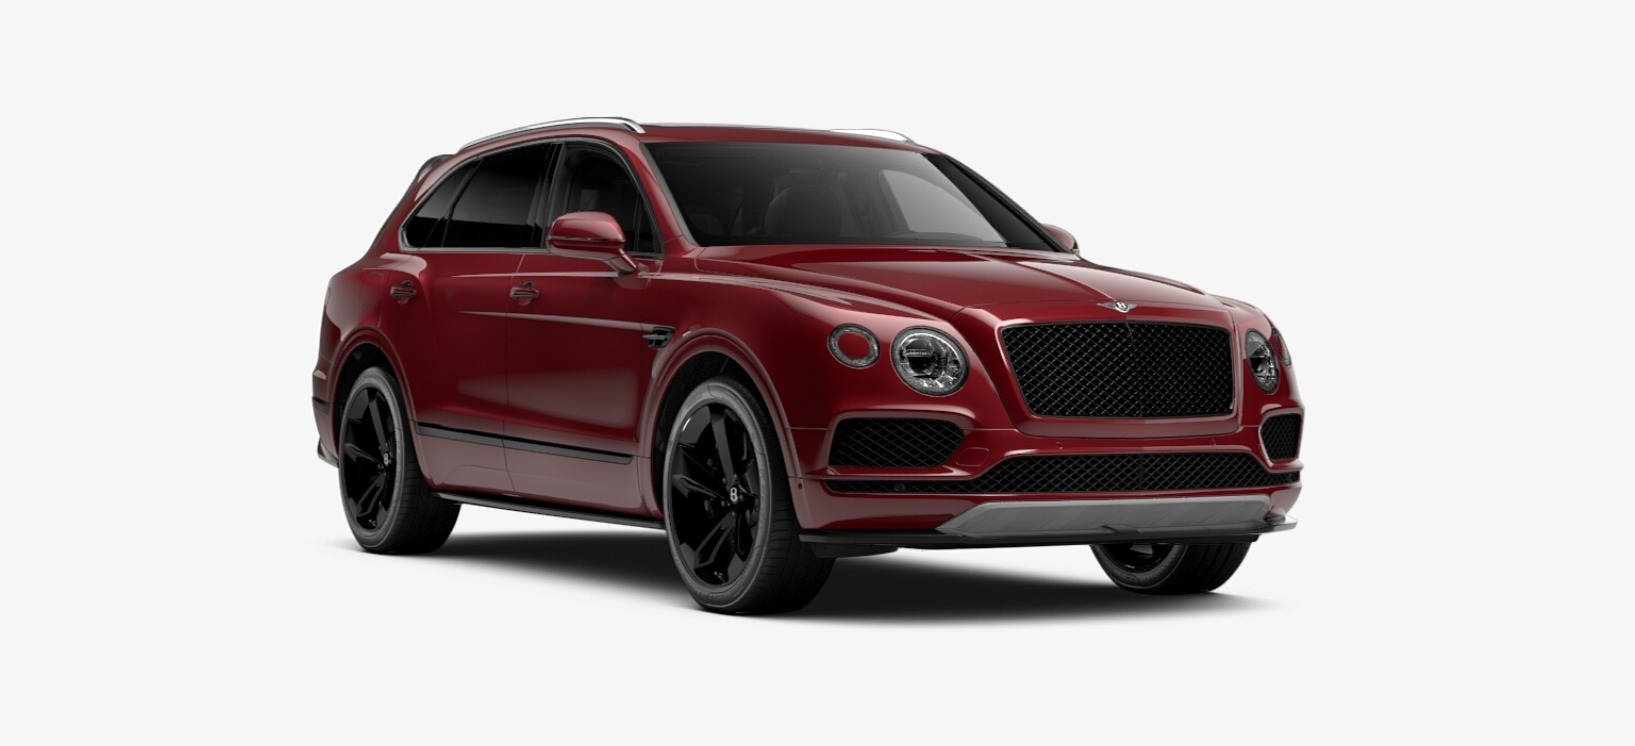 New 2018 Bentley Bentayga Black Edition for sale Sold at Maserati of Greenwich in Greenwich CT 06830 1